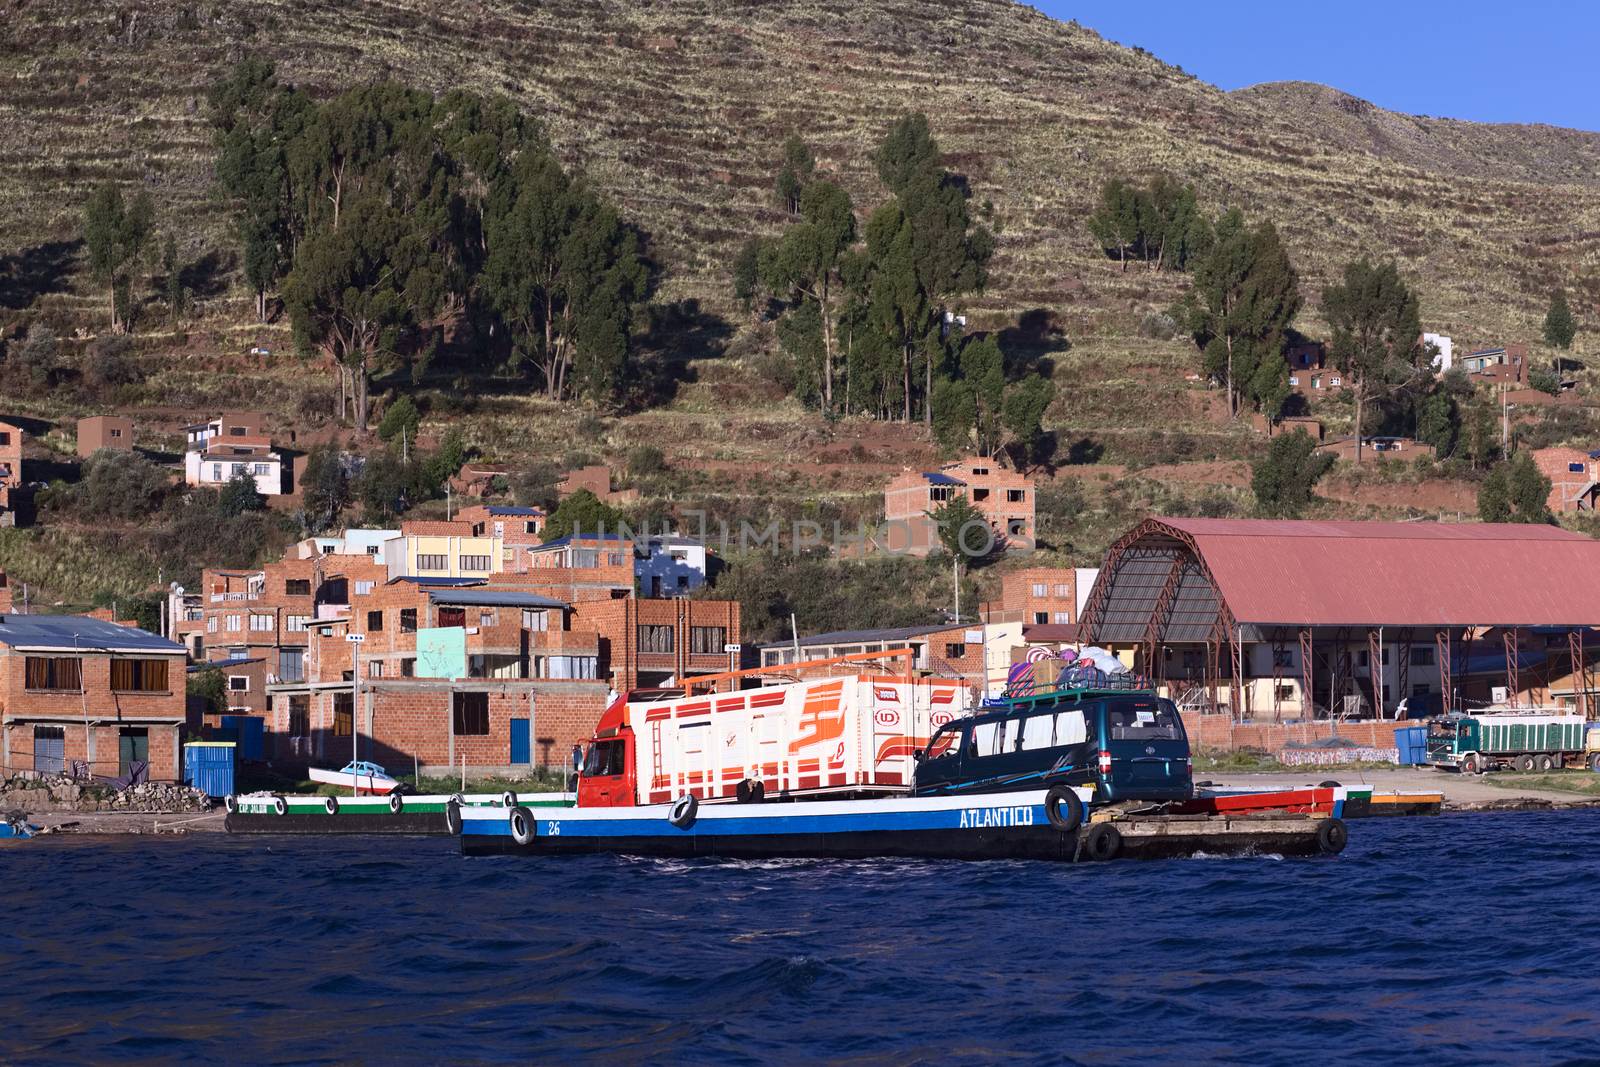 TIQUINA, BOLIVIA - OCTOBER 16, 2014: Wooden ferry loaded with truck and minibus crossing the Strait of Tiquina at Lake Titicaca on October 16, 2014 in San Pablo de Tiquina, Bolivia